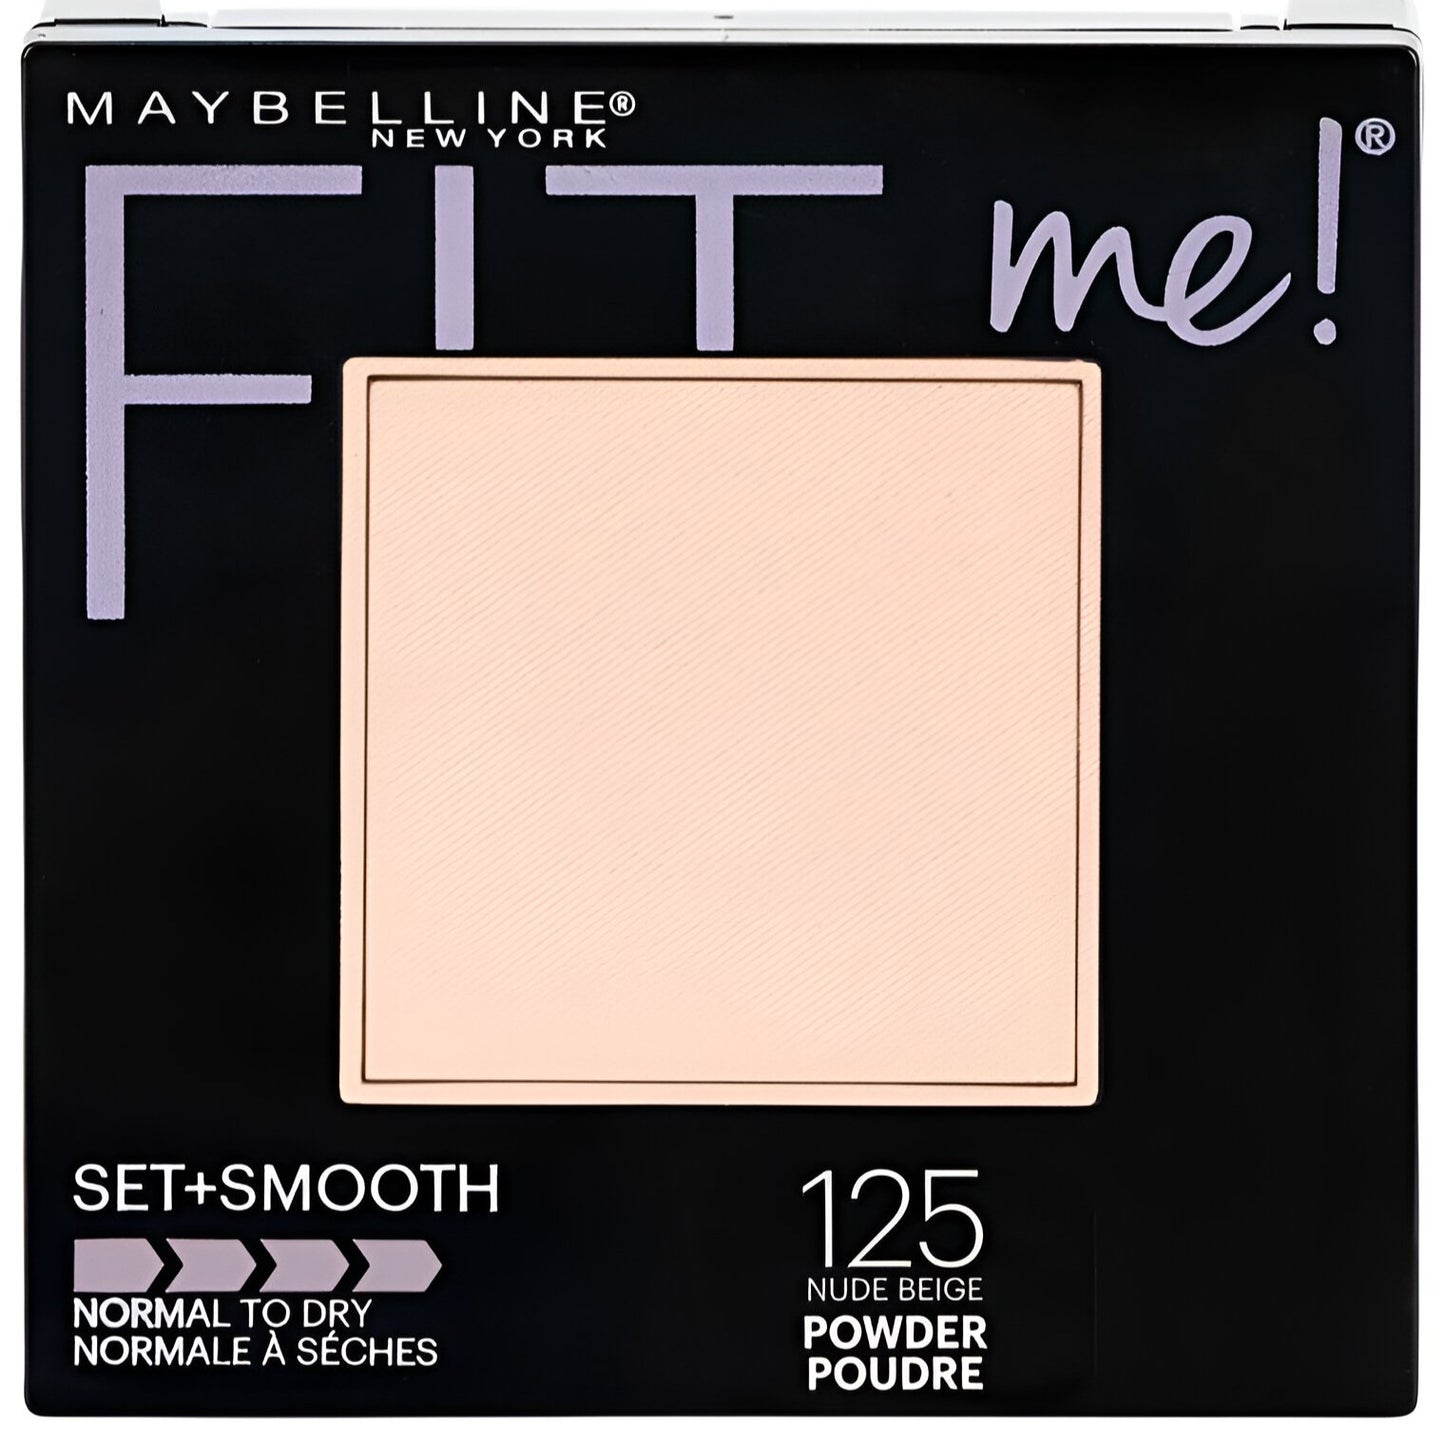 Fit Me Dewy Smooth Polvo Compacto